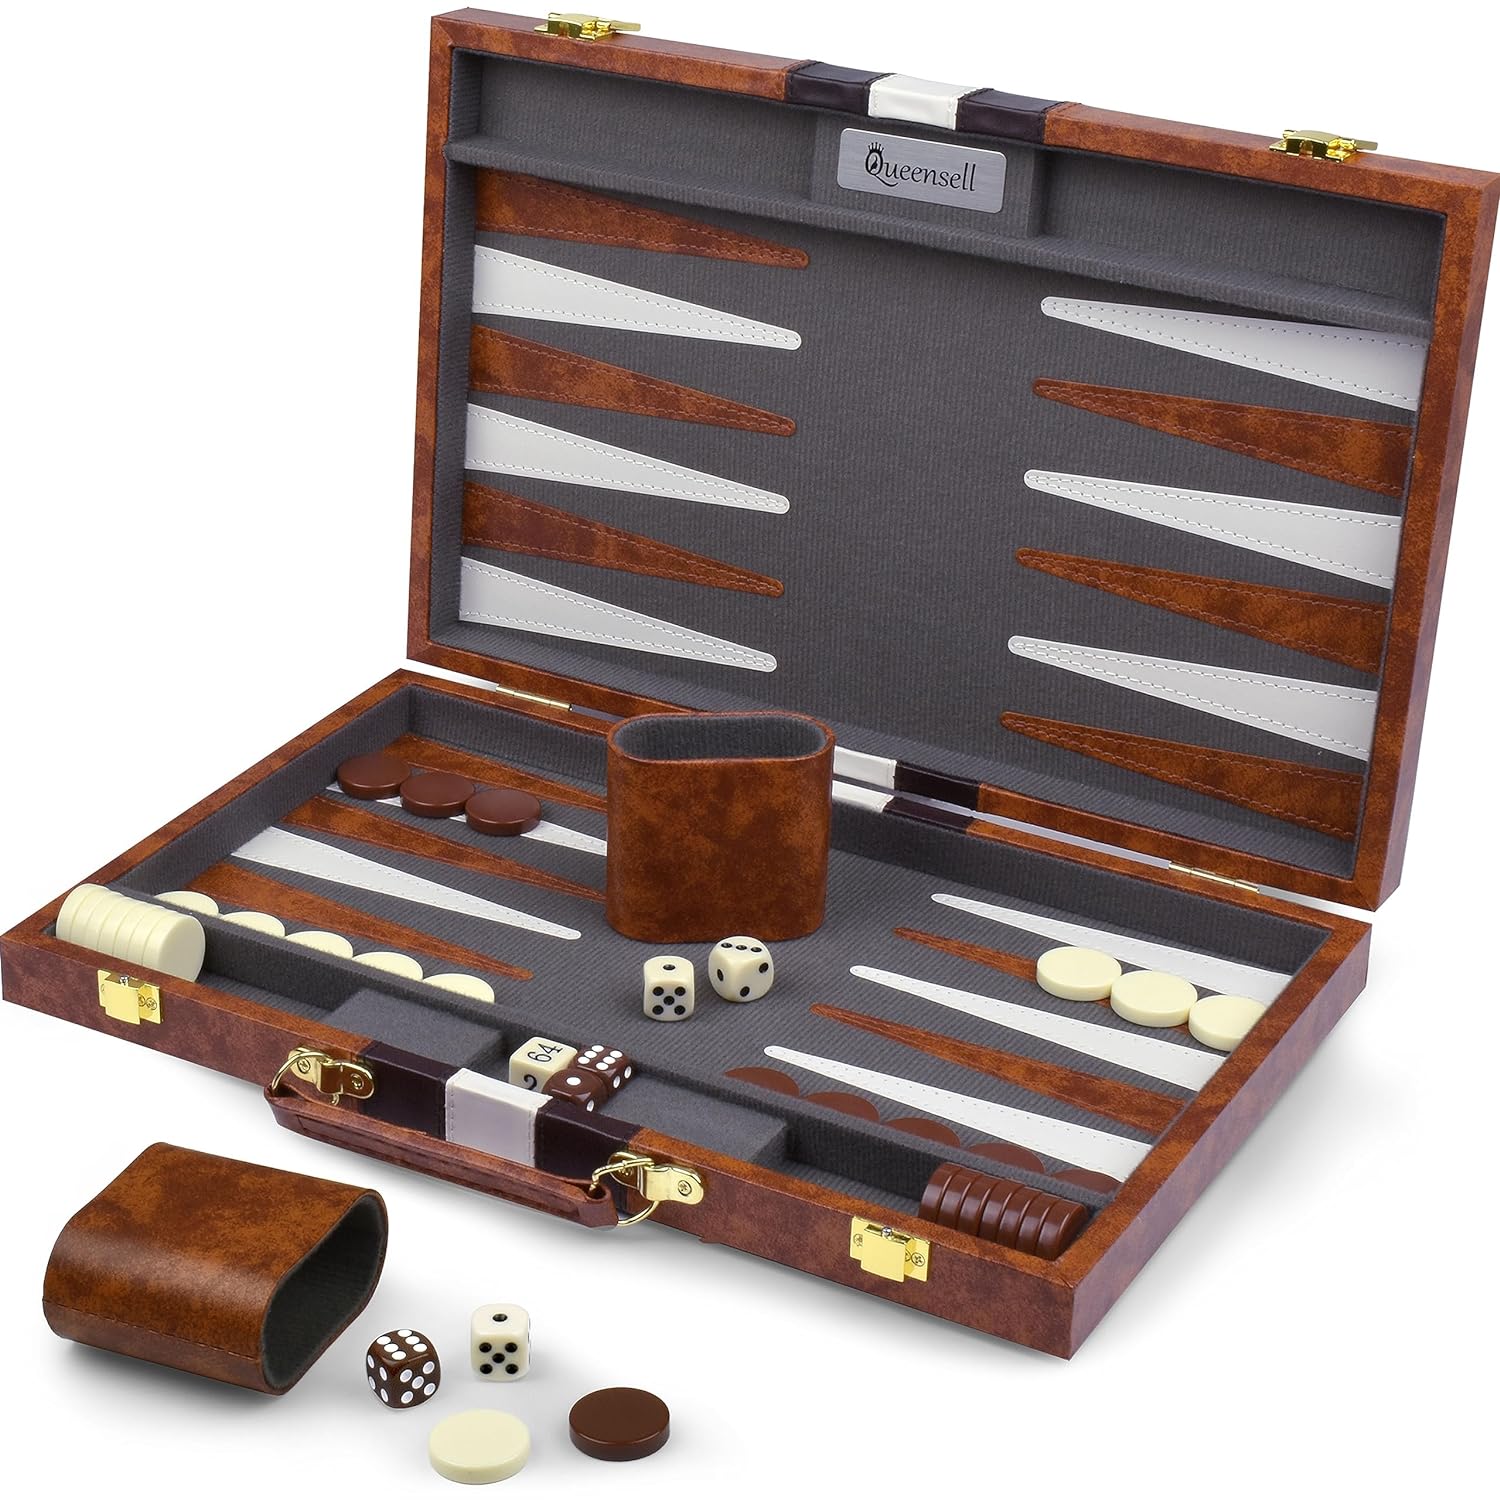 Great Choice Products Backgammon Sets For Adults - Best Travel Backgammon Board Games For Adults - Travel Backgammon Set - Backgammon 15 Inch …